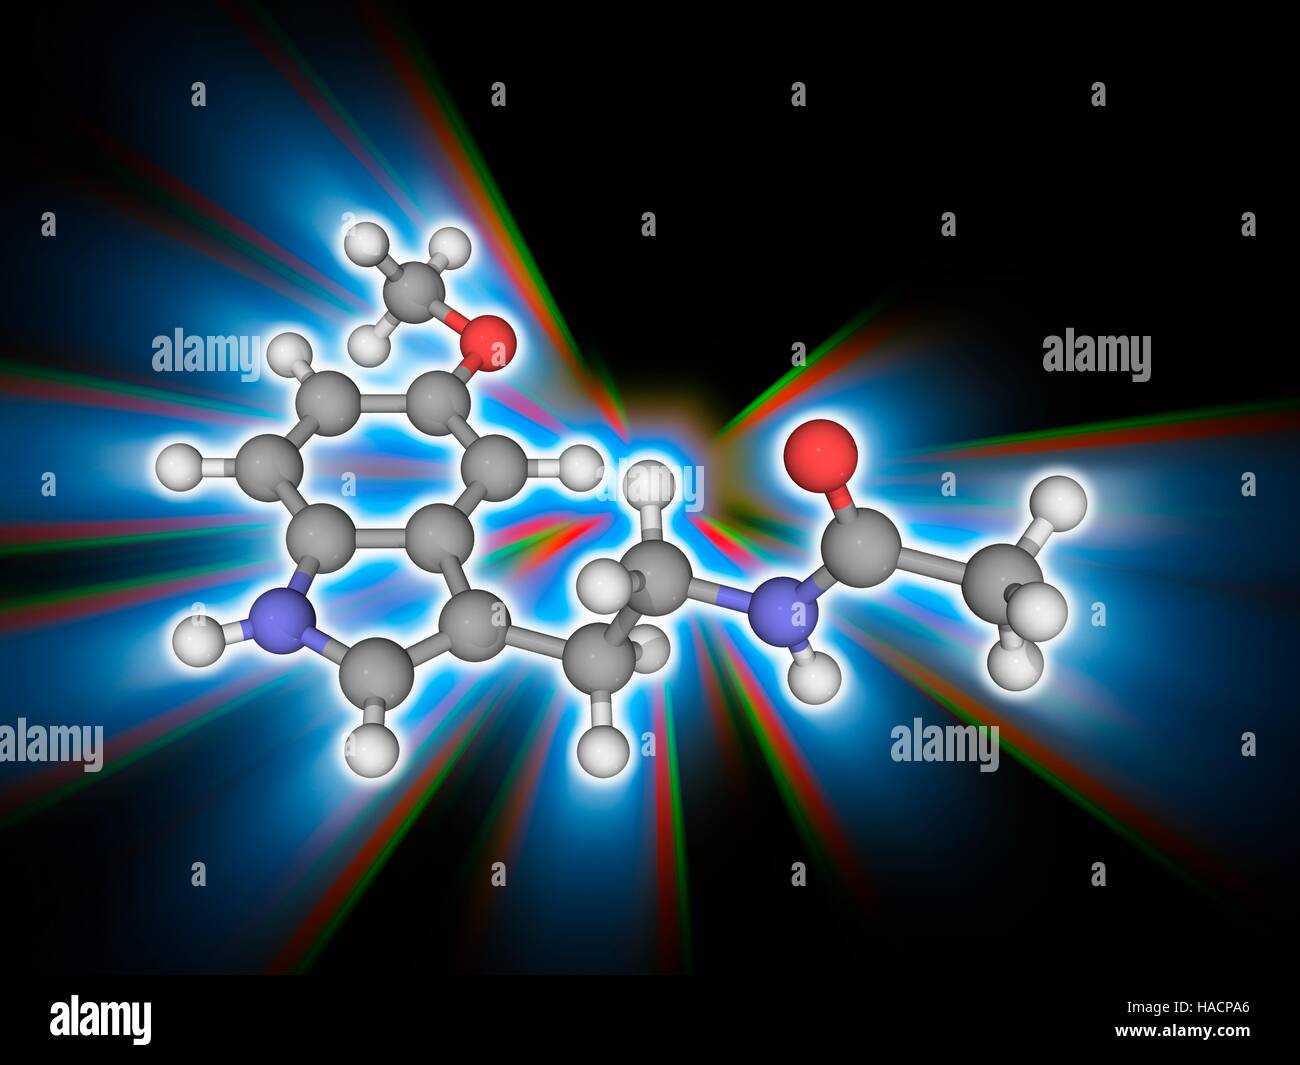 Melatonin. Molecular model of the hormone melatonin (C13.H16.N2.O2), a naturally occurring compound found in animals, plants and microbes. Its effects in animals include sleep timing, blood pressure regulation, and seasonal reproduction. Atoms are represented as spheres and are colour-coded: carbon (grey), hydrogen (white), nitrogen (blue) and oxygen (red). Illustration. Stock Photo